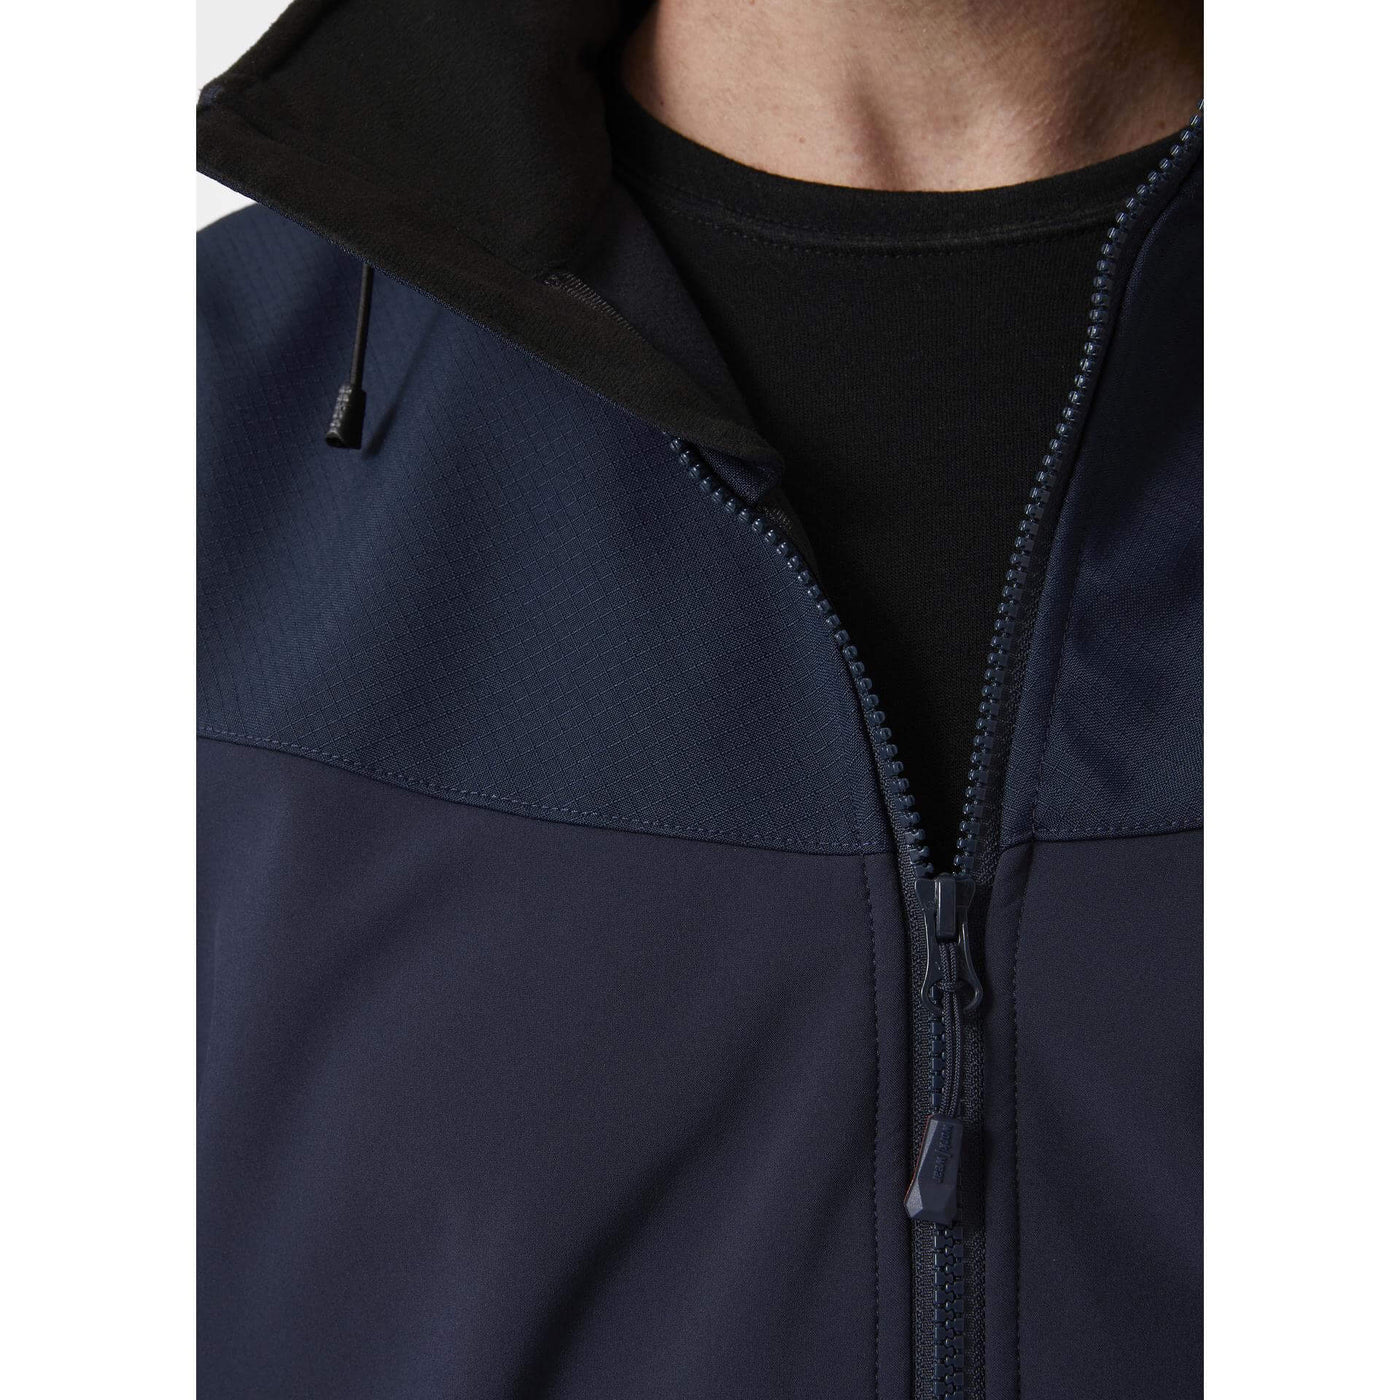 Helly Hansen Oxford Hooded Softshell Jacket Navy 5 Feature 1#colour_navy